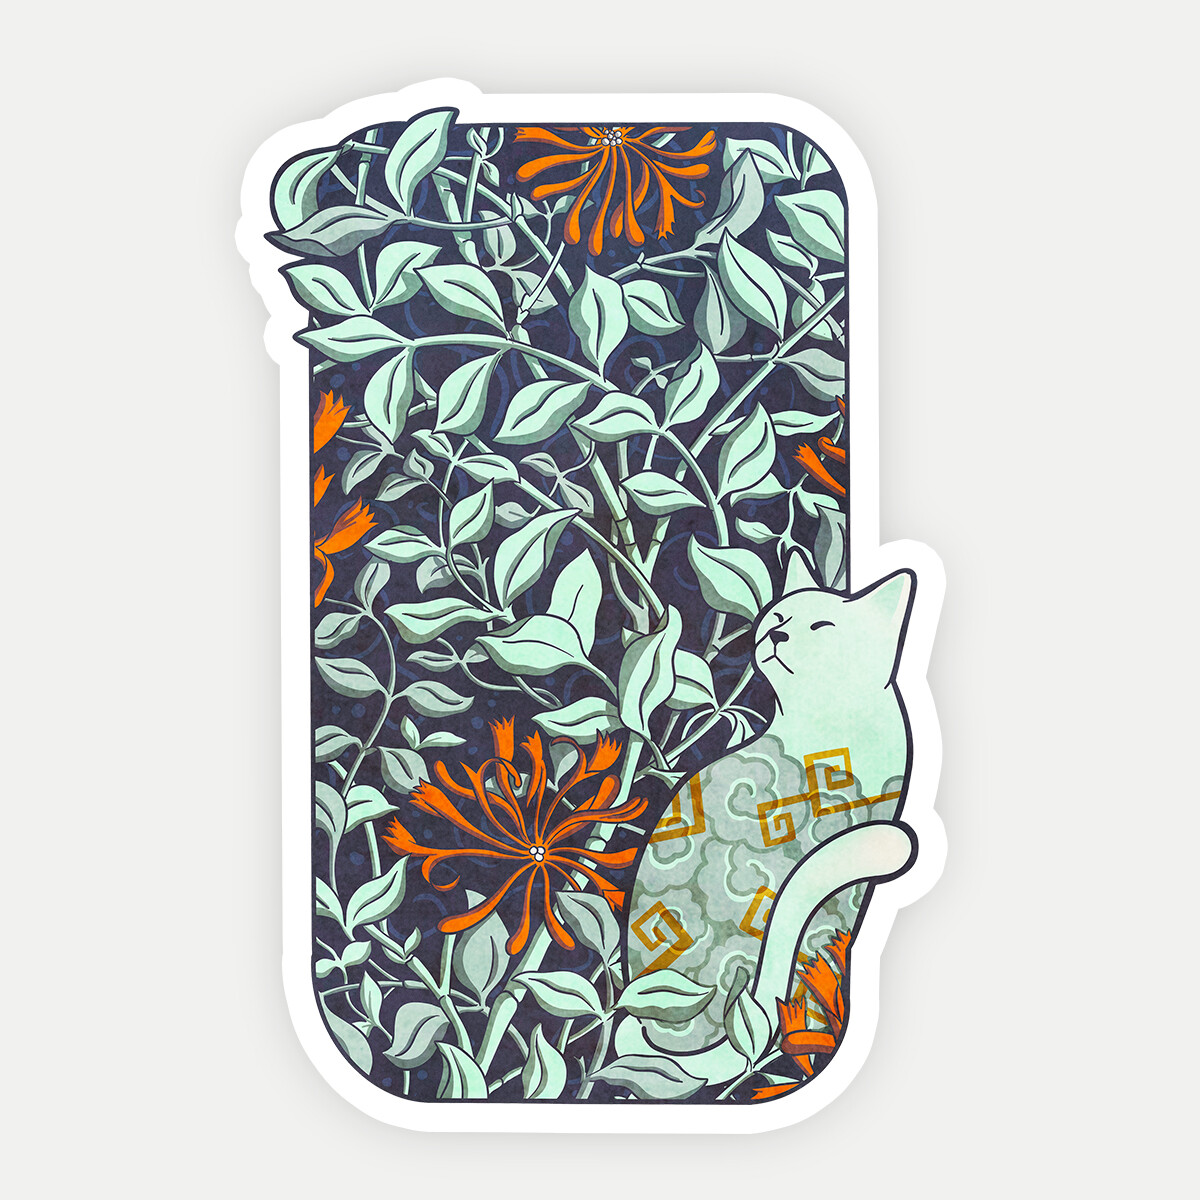 Sticker version. Available in Redbubble and Society6 stores.